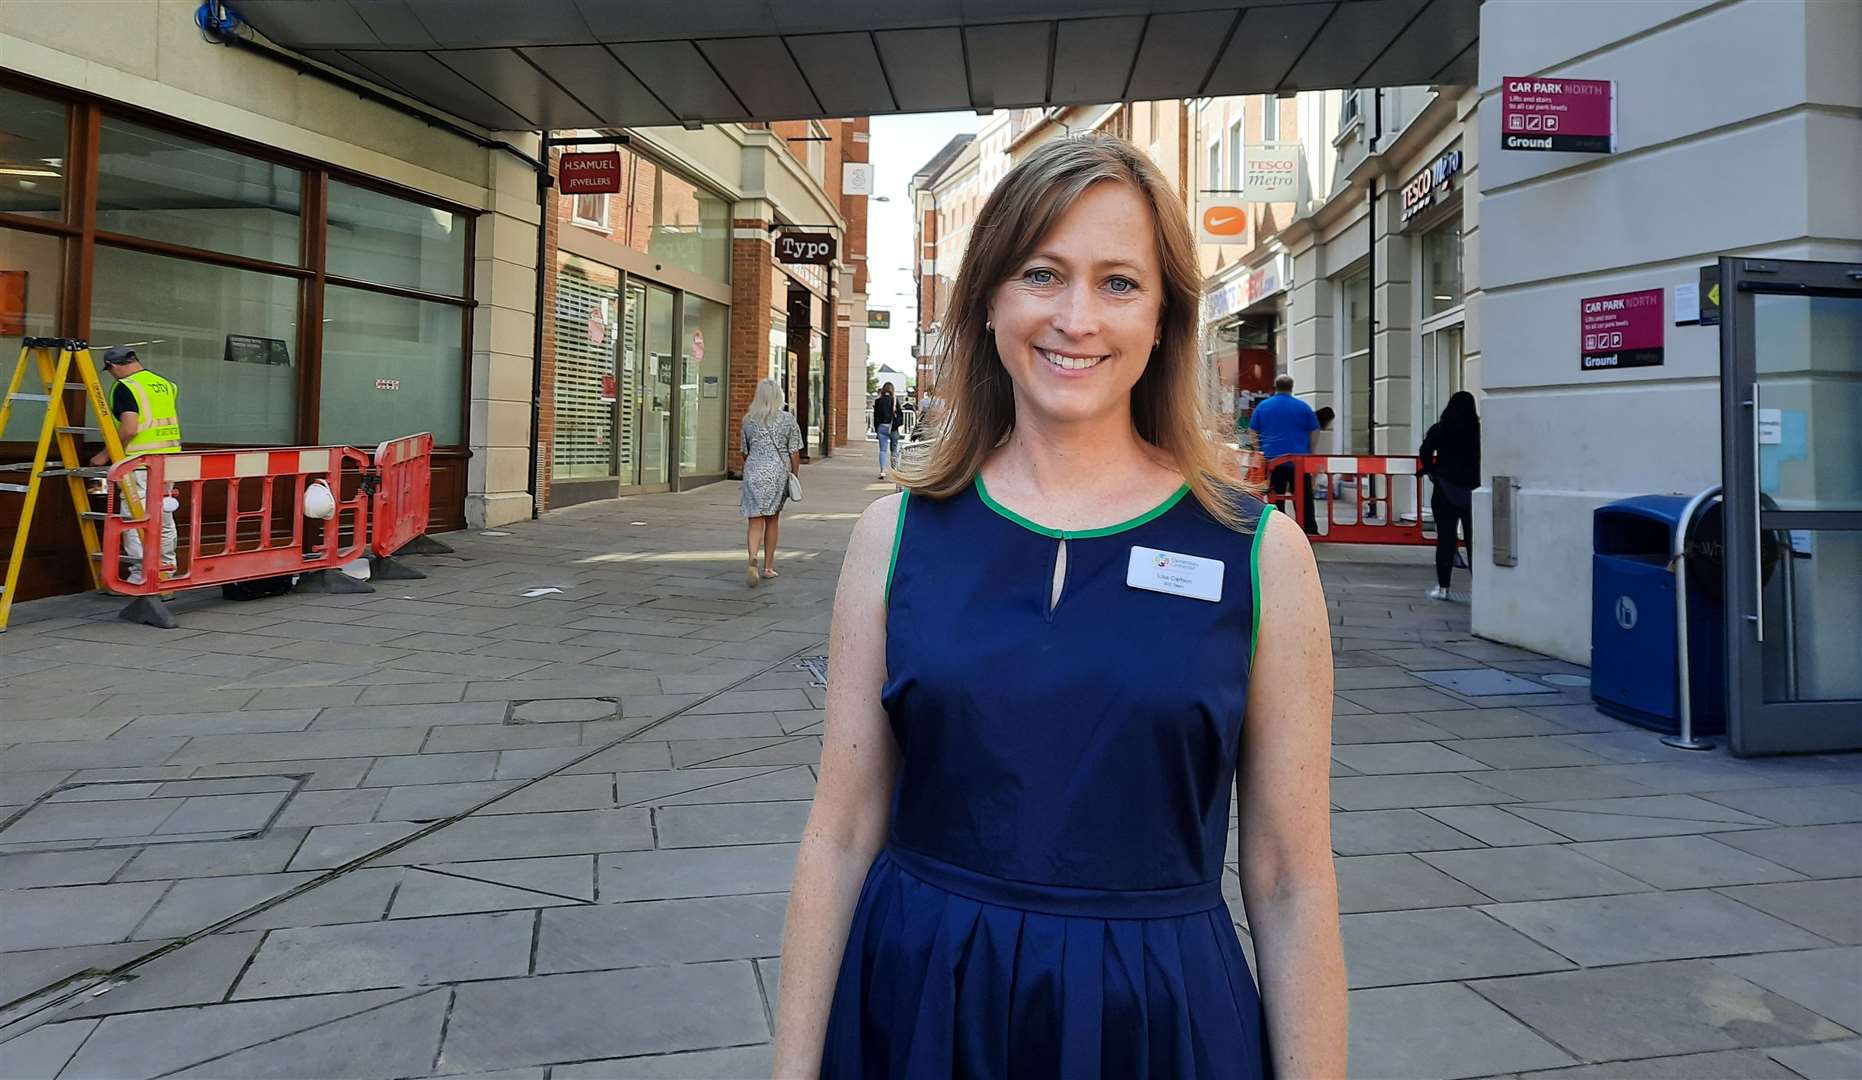 Canterbury BID’s Lisa Carlson spoke positively about the future of Canterbury as a place for retail and hospitality